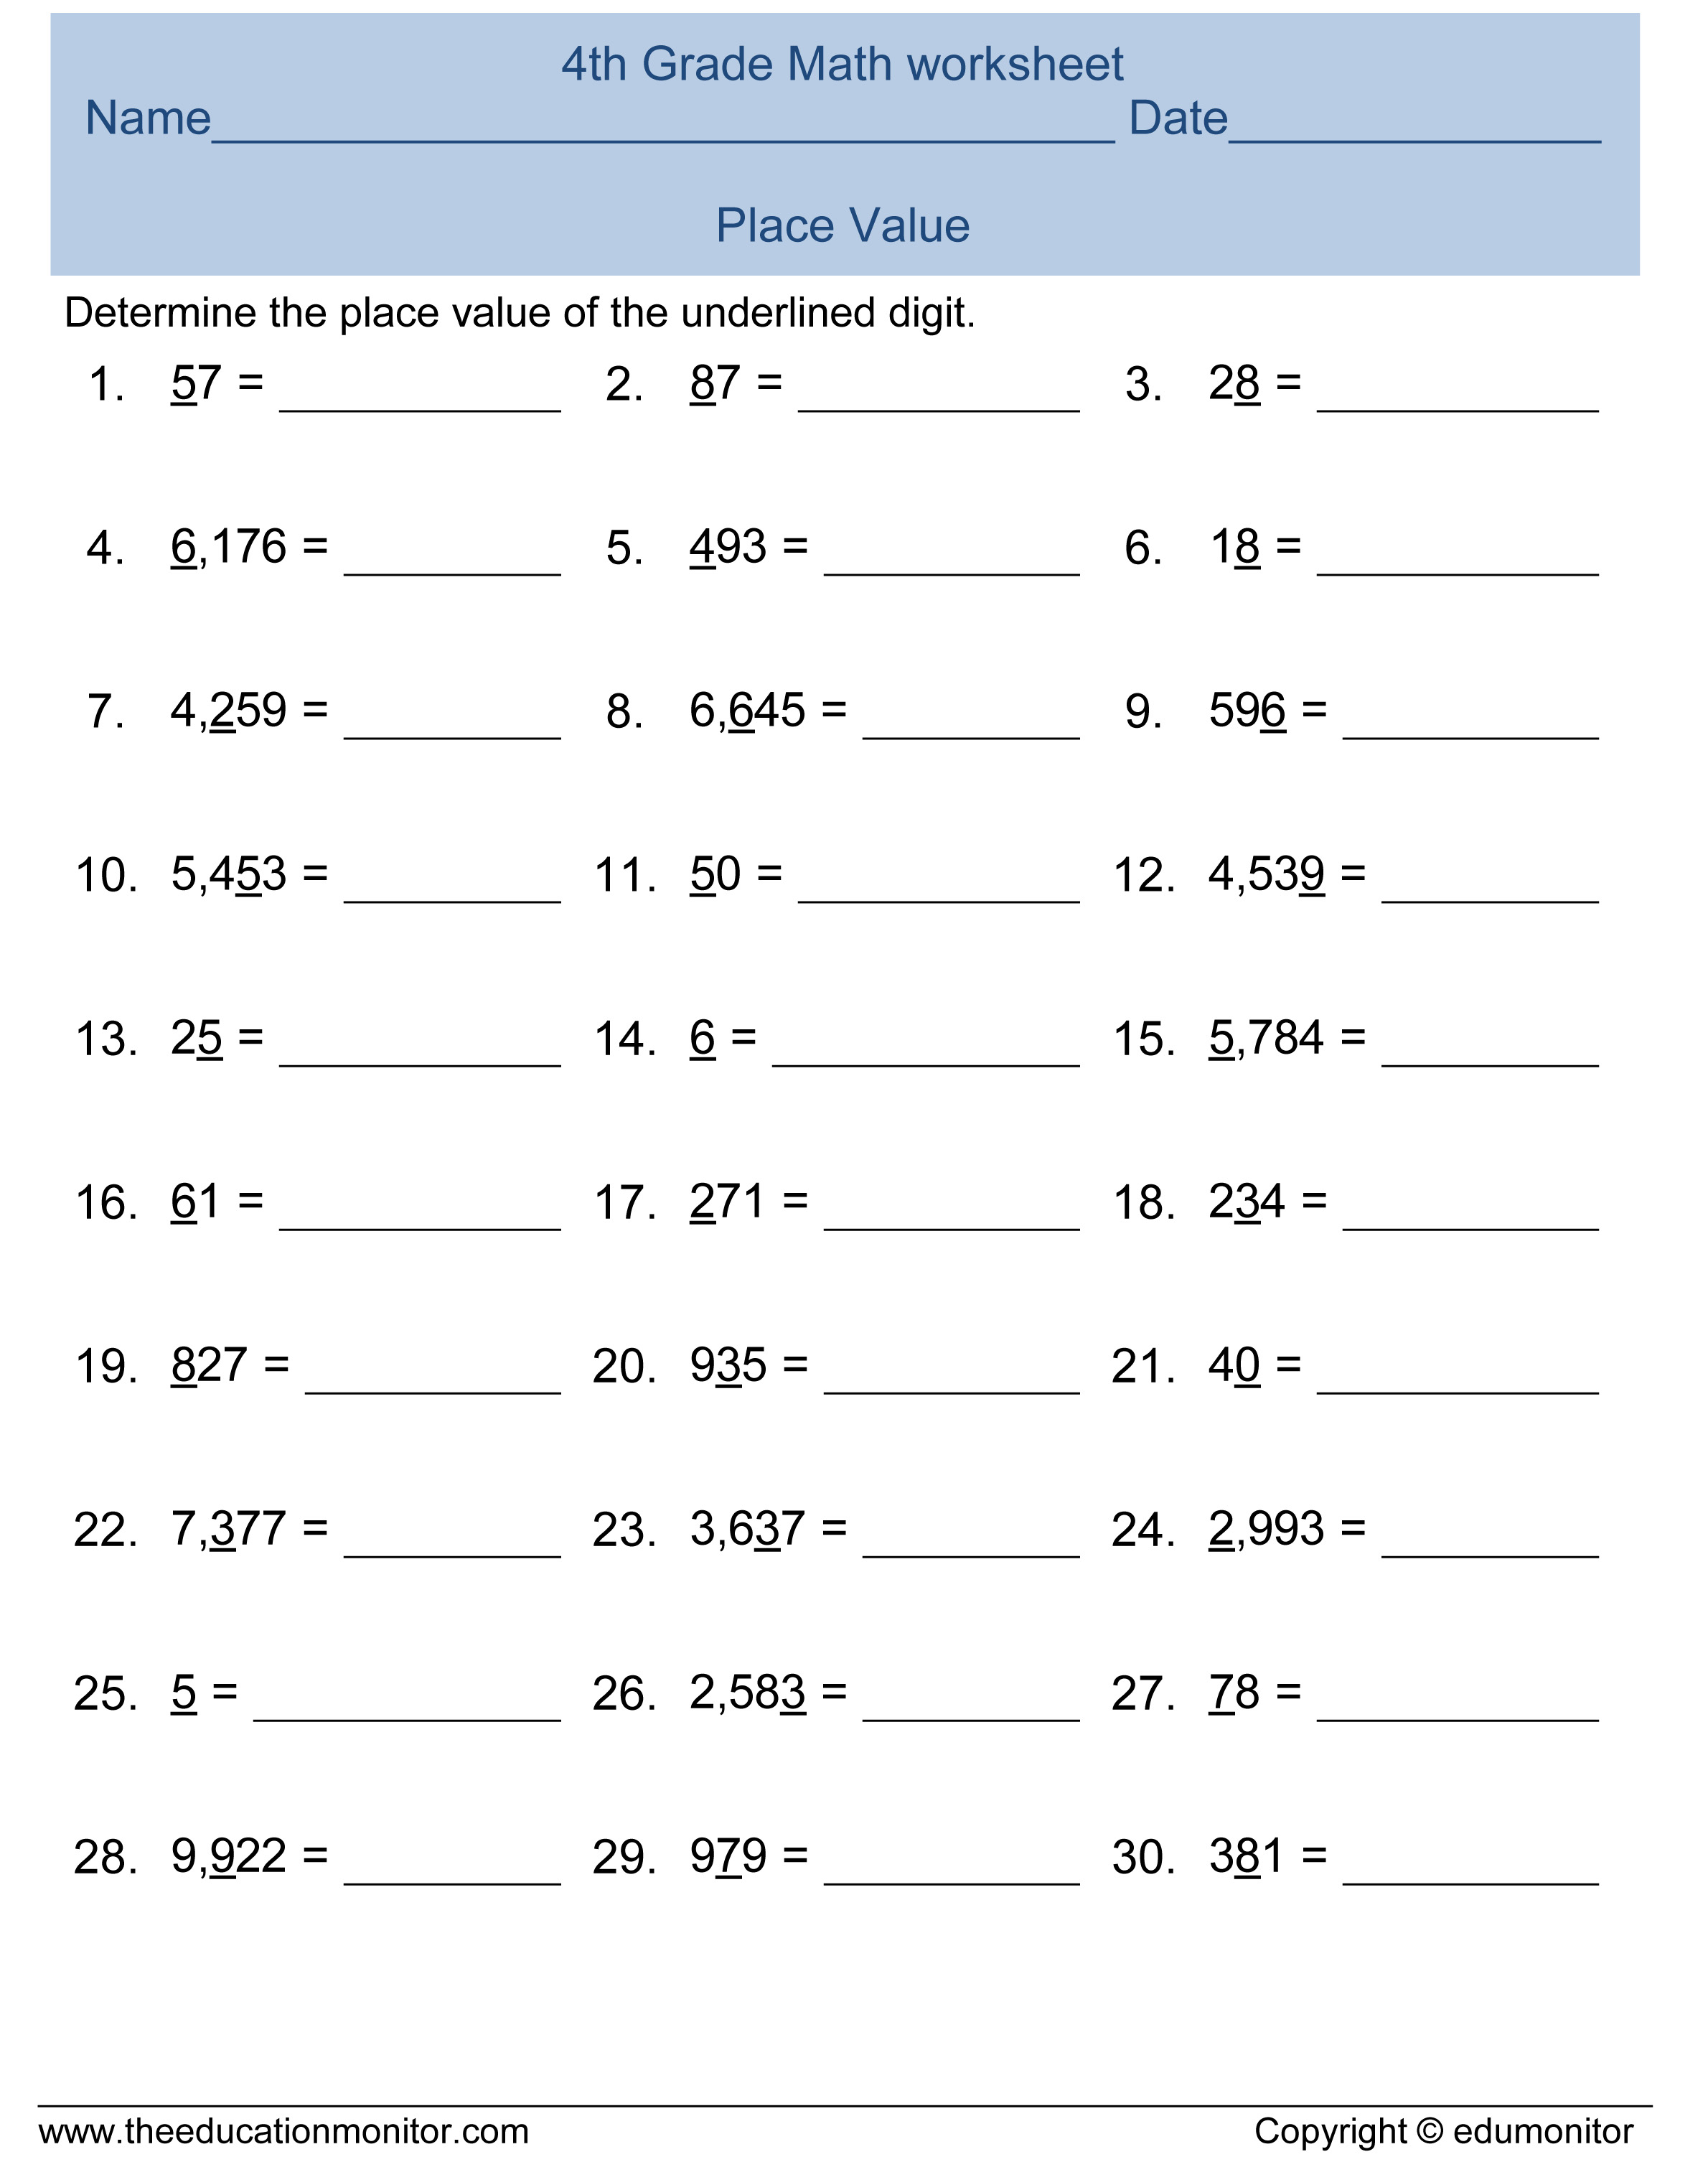 Place Value Worksheets And Printables | Free Place Value Printables | Free Printable Place Value Worksheets For Fifth Grade